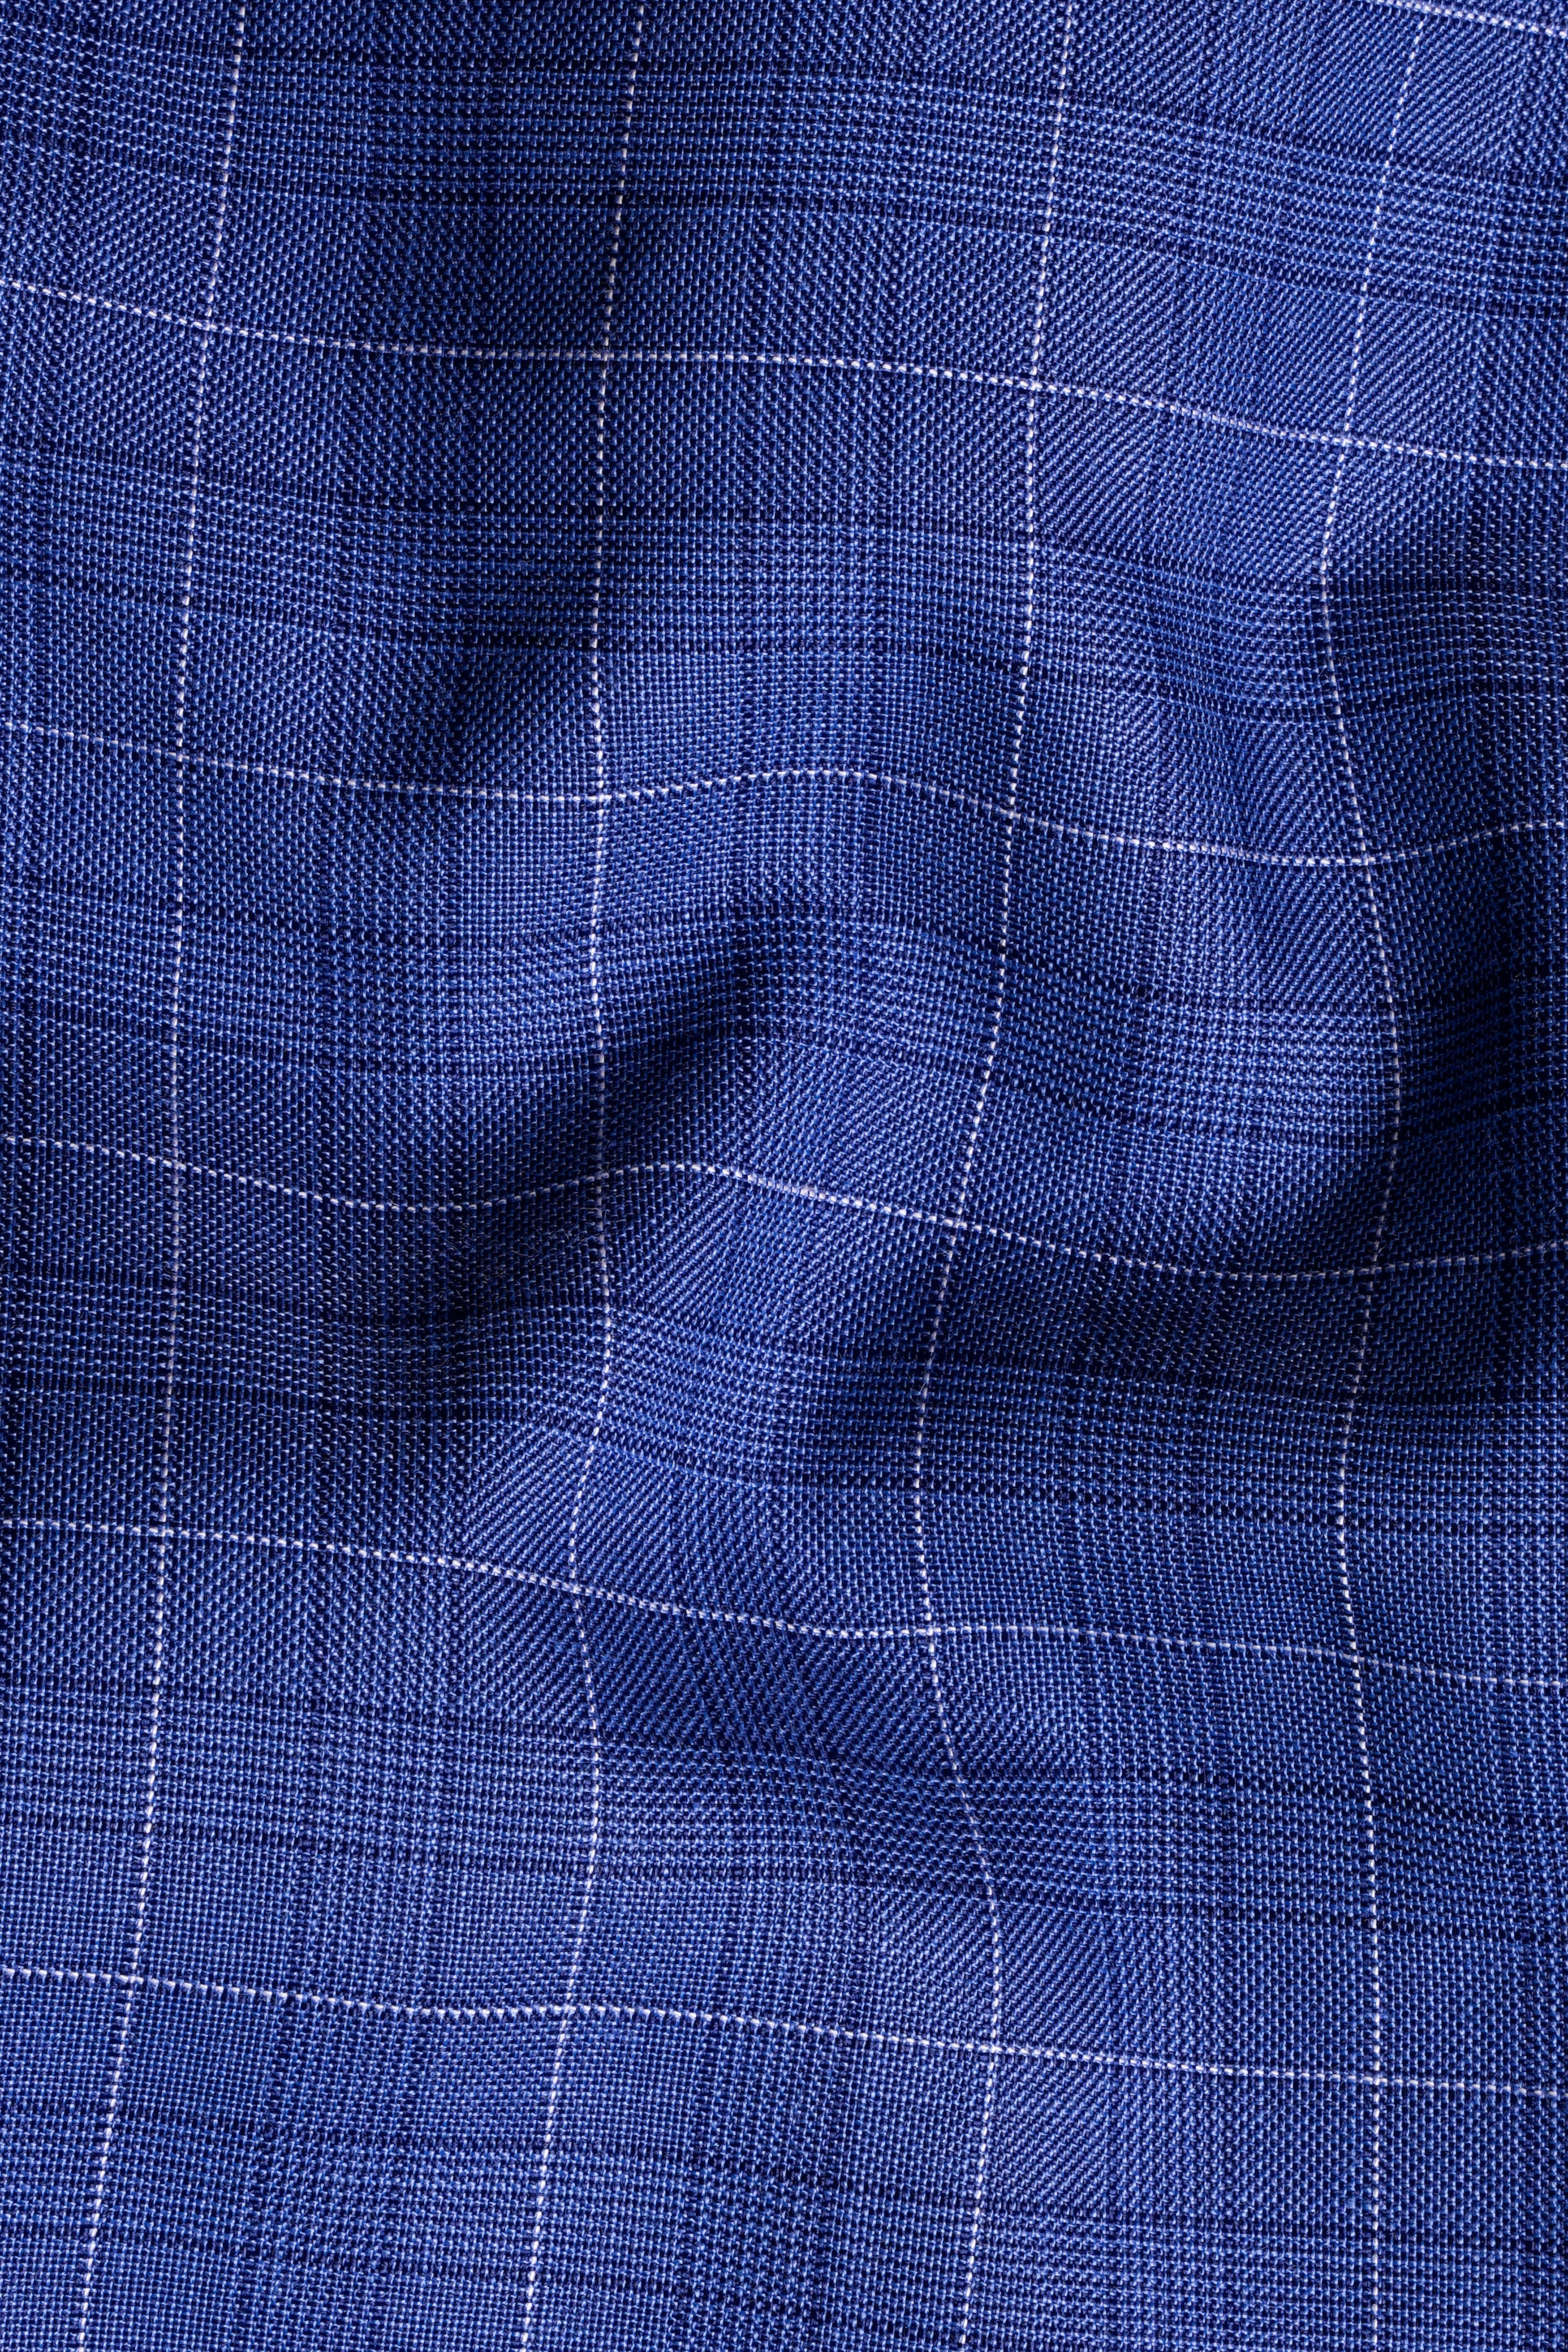 Yonder Blue Plaid Wool Rich Double Breasted Suit ST2944-DB-36,ST2944-DB-38,ST2944-DB-40,ST2944-DB-42,ST2944-DB-44,ST2944-DB-46,ST2944-DB-48,ST2944-DB-50,ST2944-DB-52,ST2944-DB-54,ST2944-DB-56,ST2944-DB-58,ST2944-DB-60